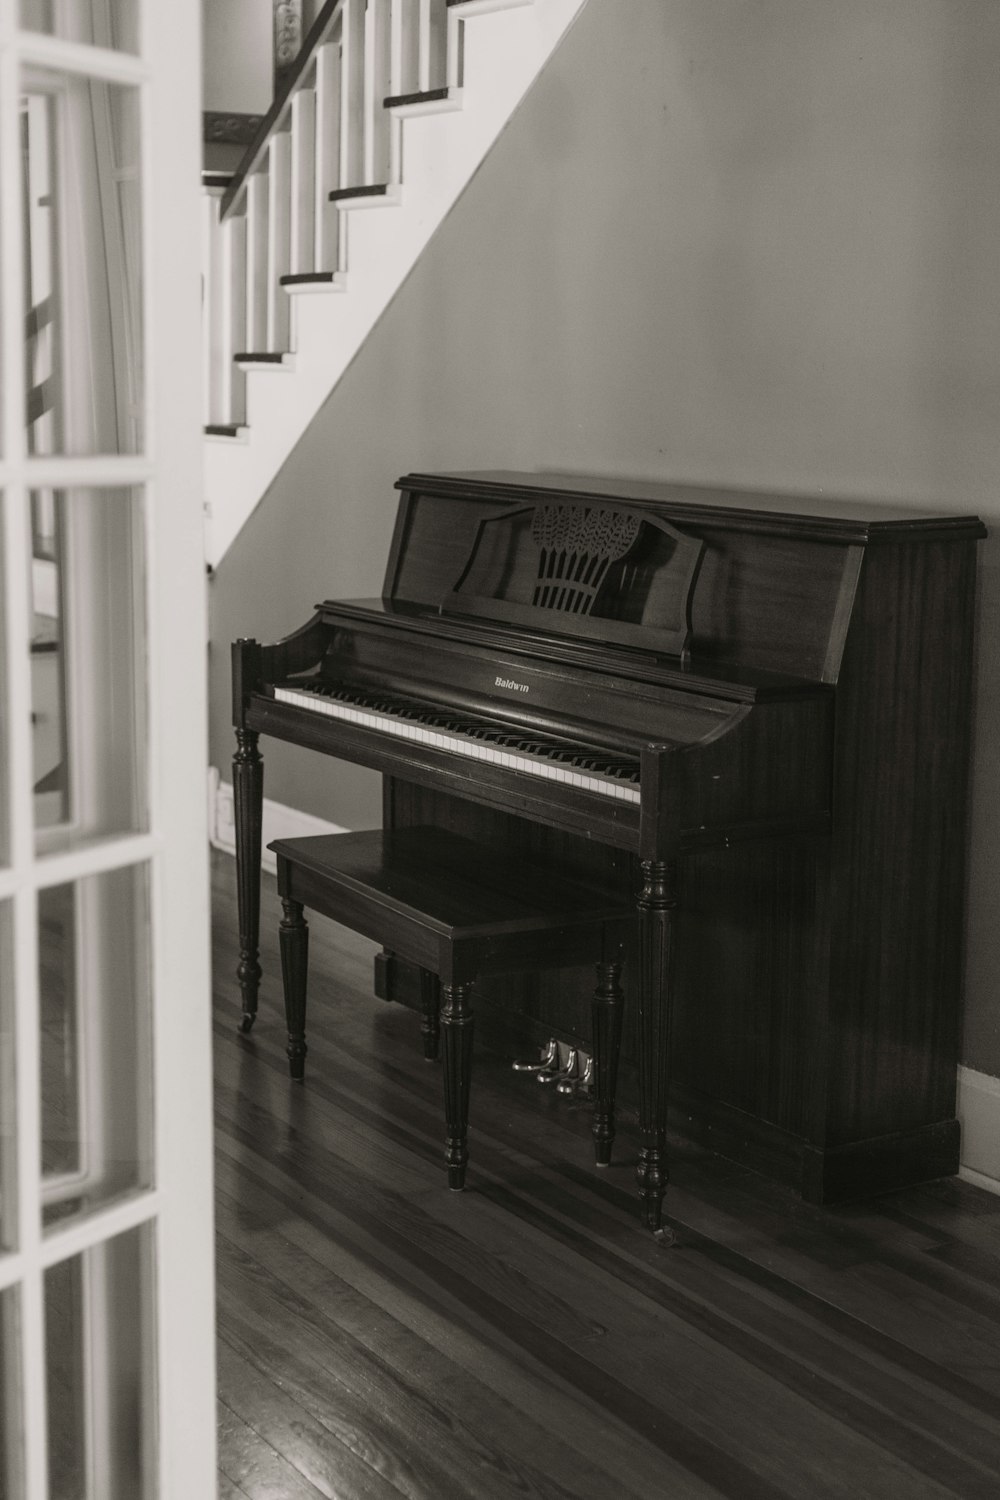 console piano under stairs photo – Free Grey Image on Unsplash